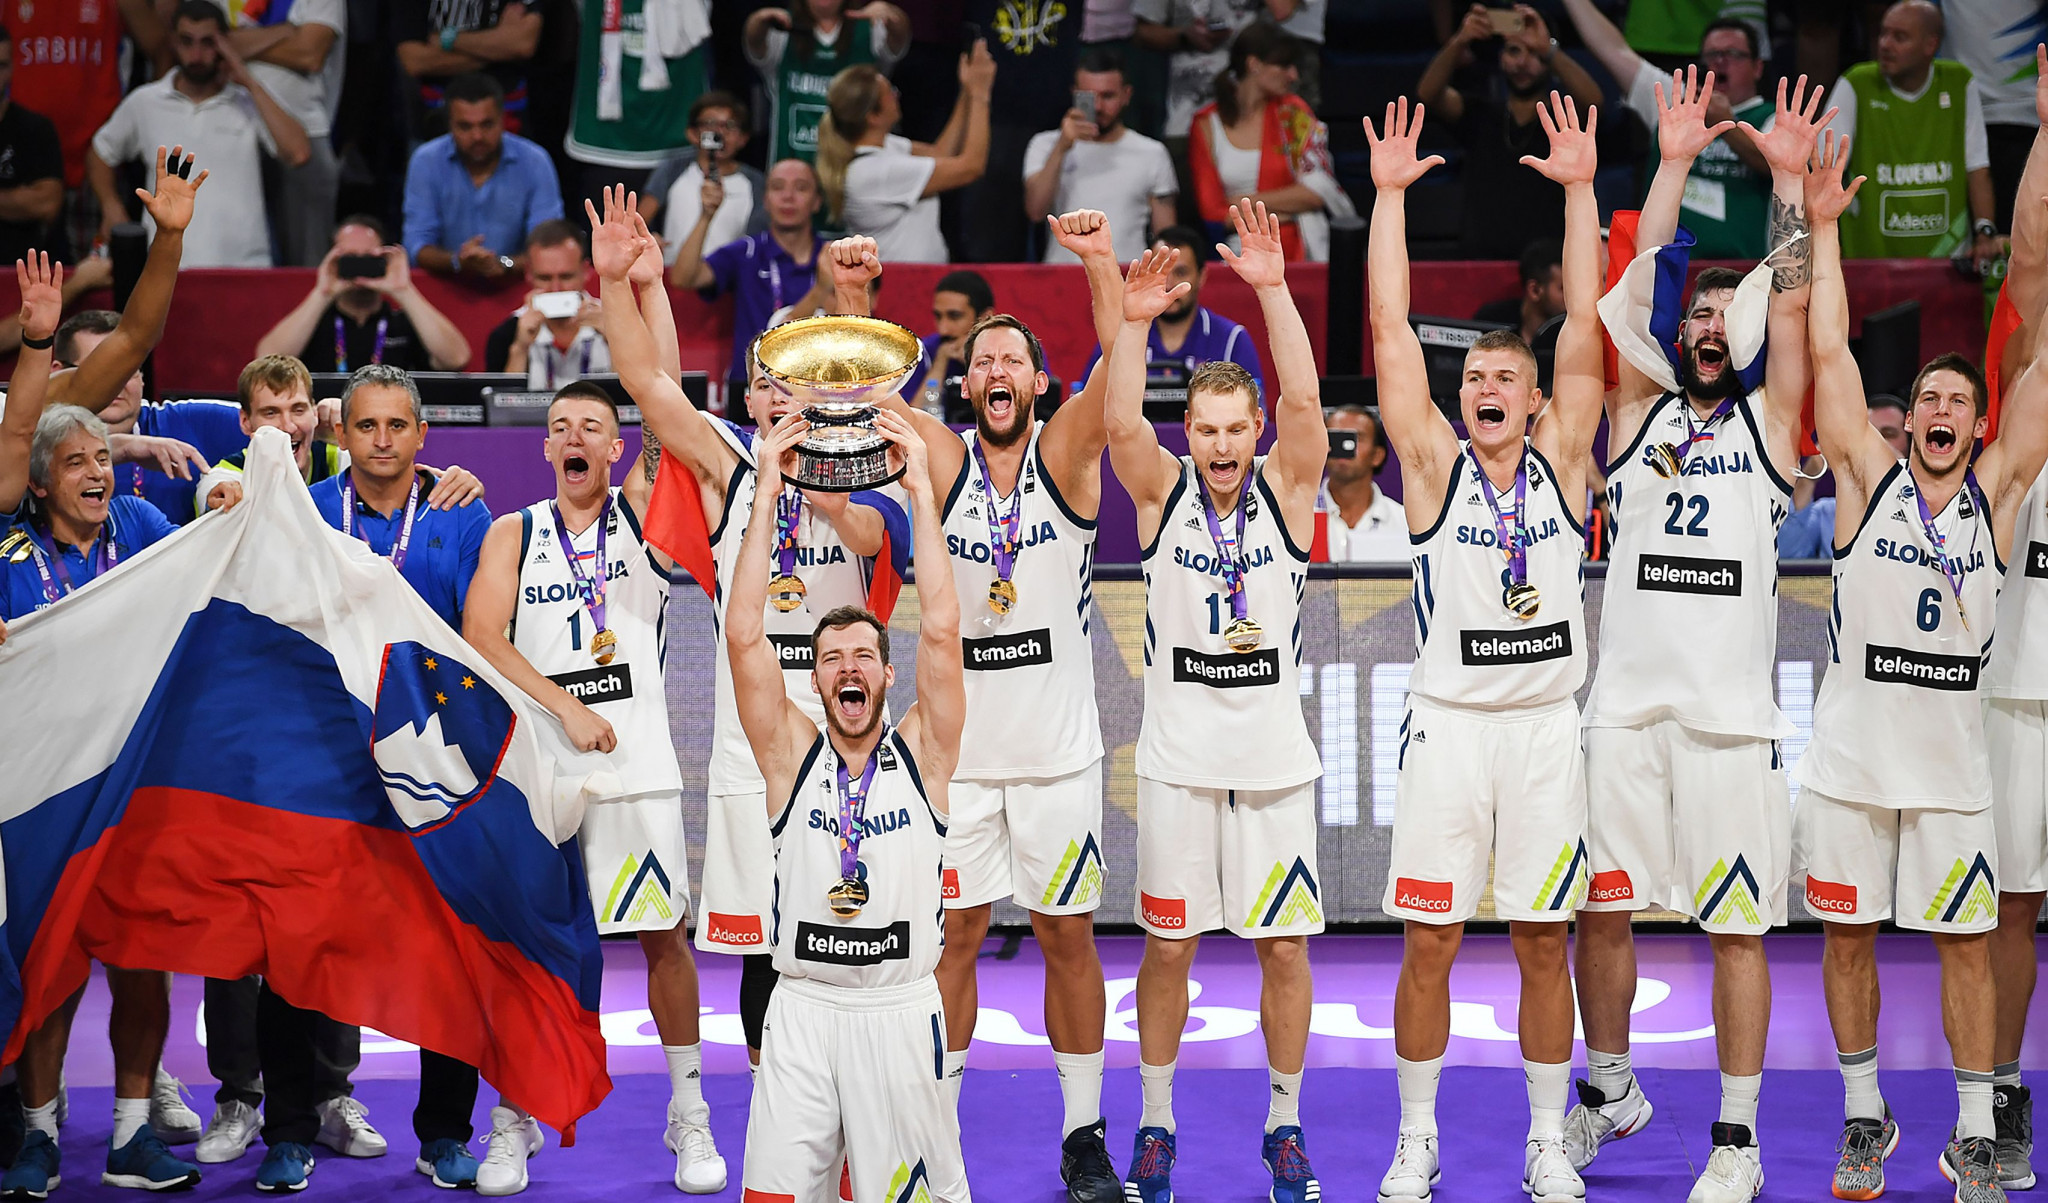 Winners of FIBA EuroBasker 2017, Slovenia, have applied to host the 2021 edition ©Getty Images